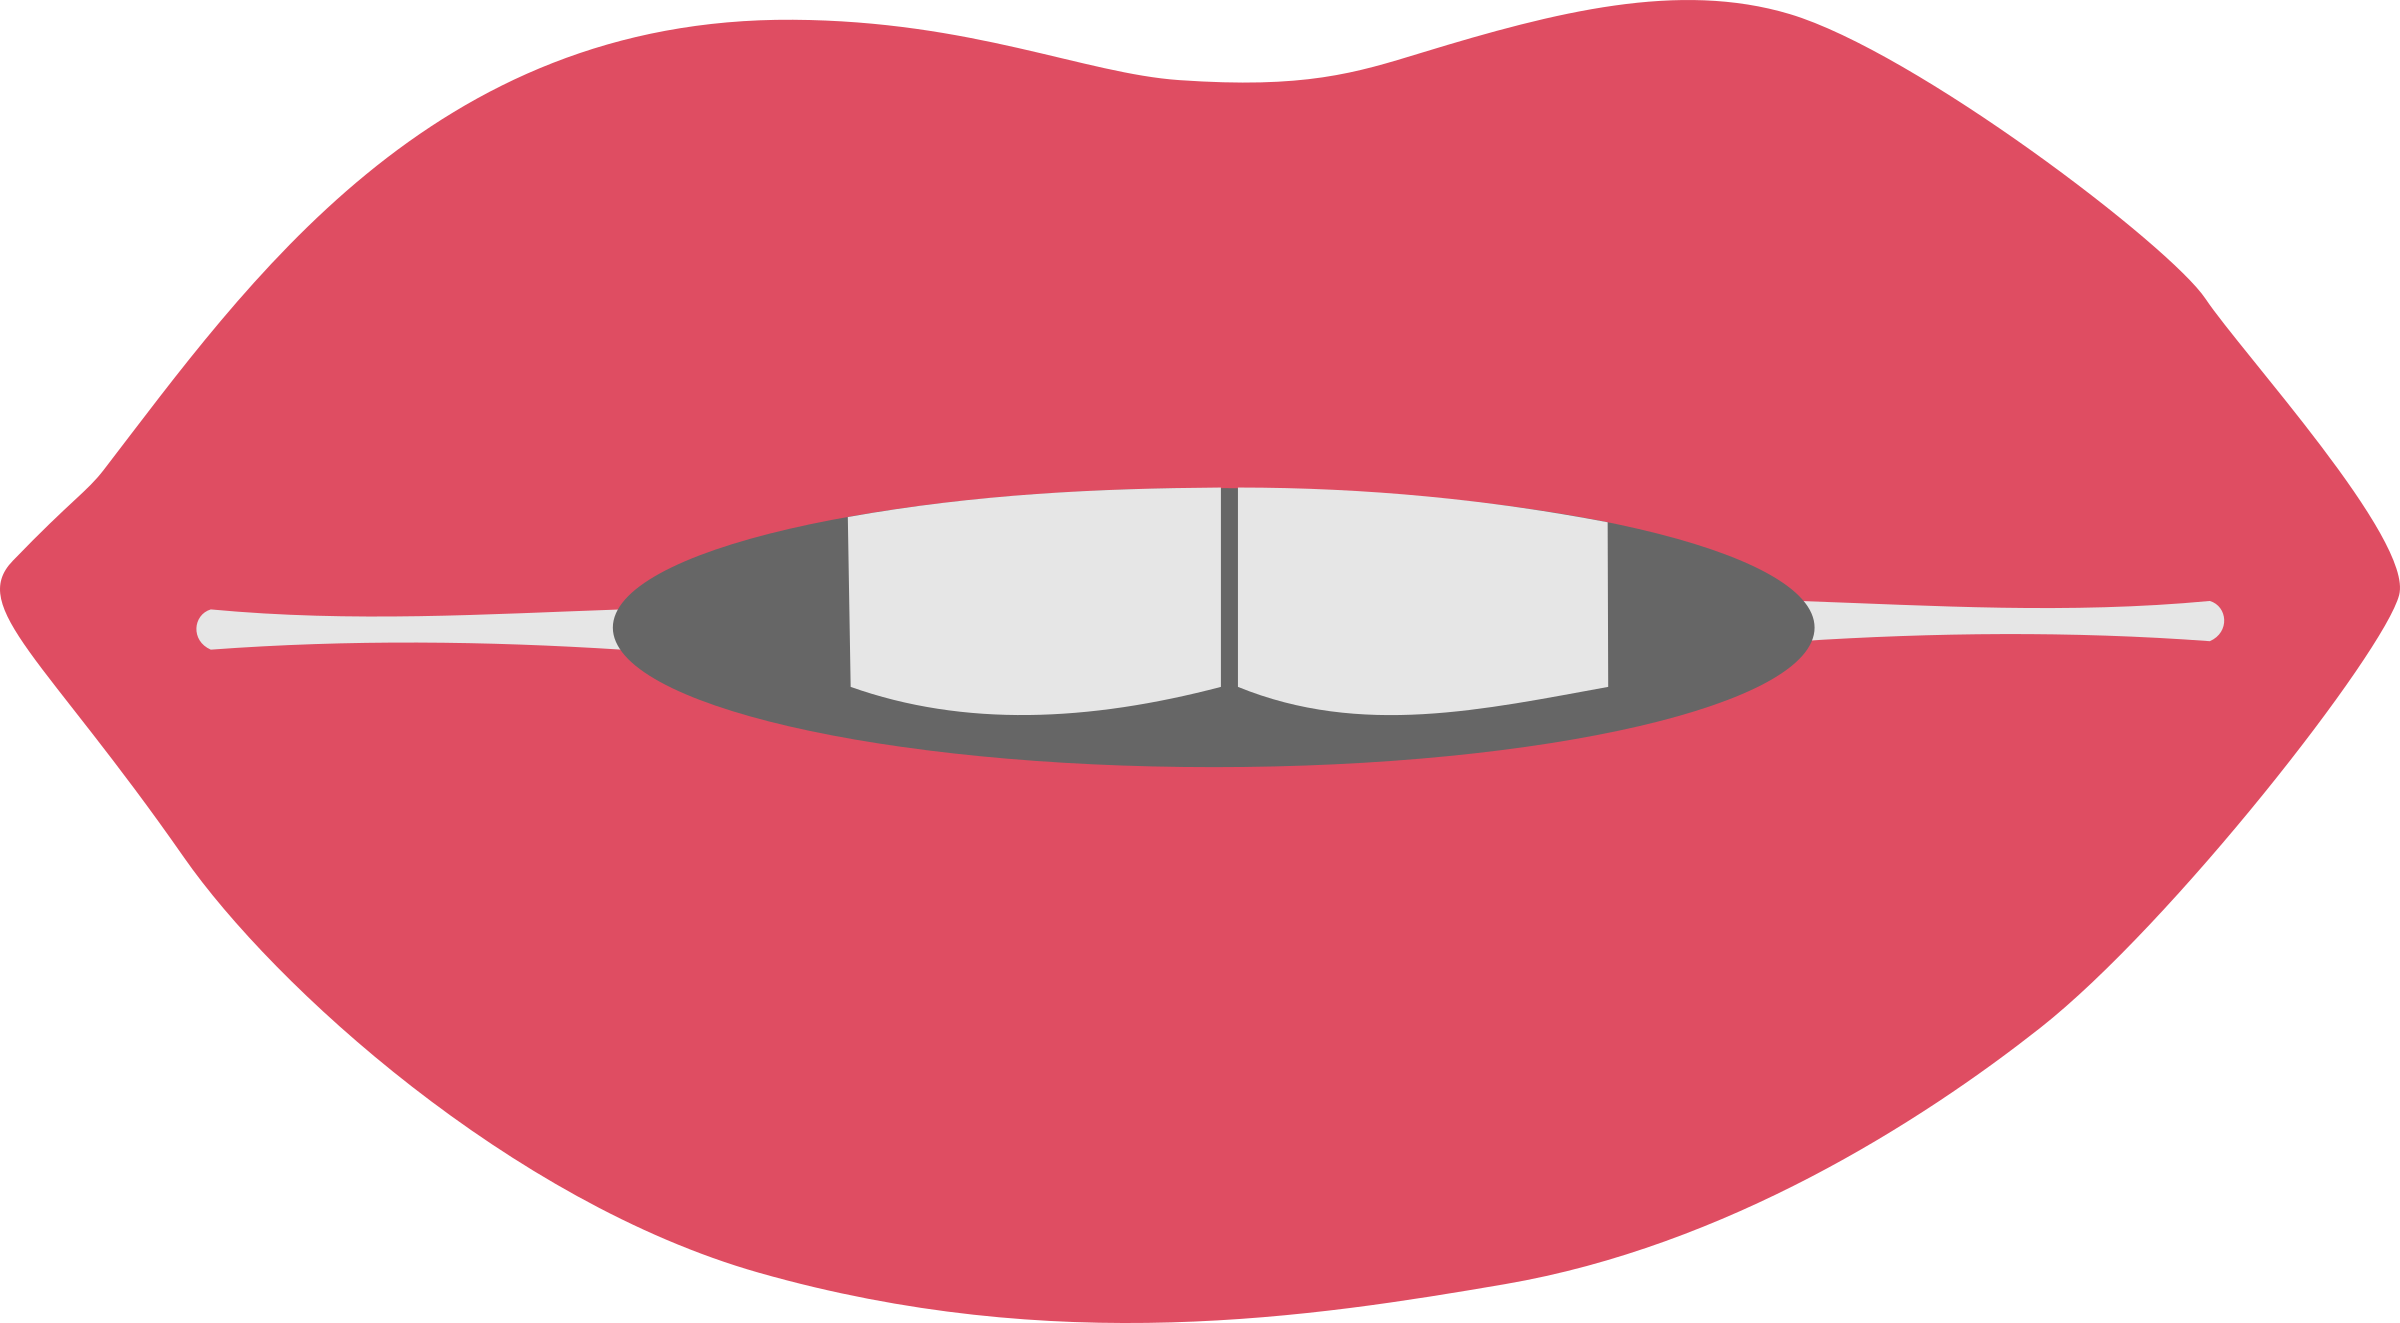 mouth clipart body part